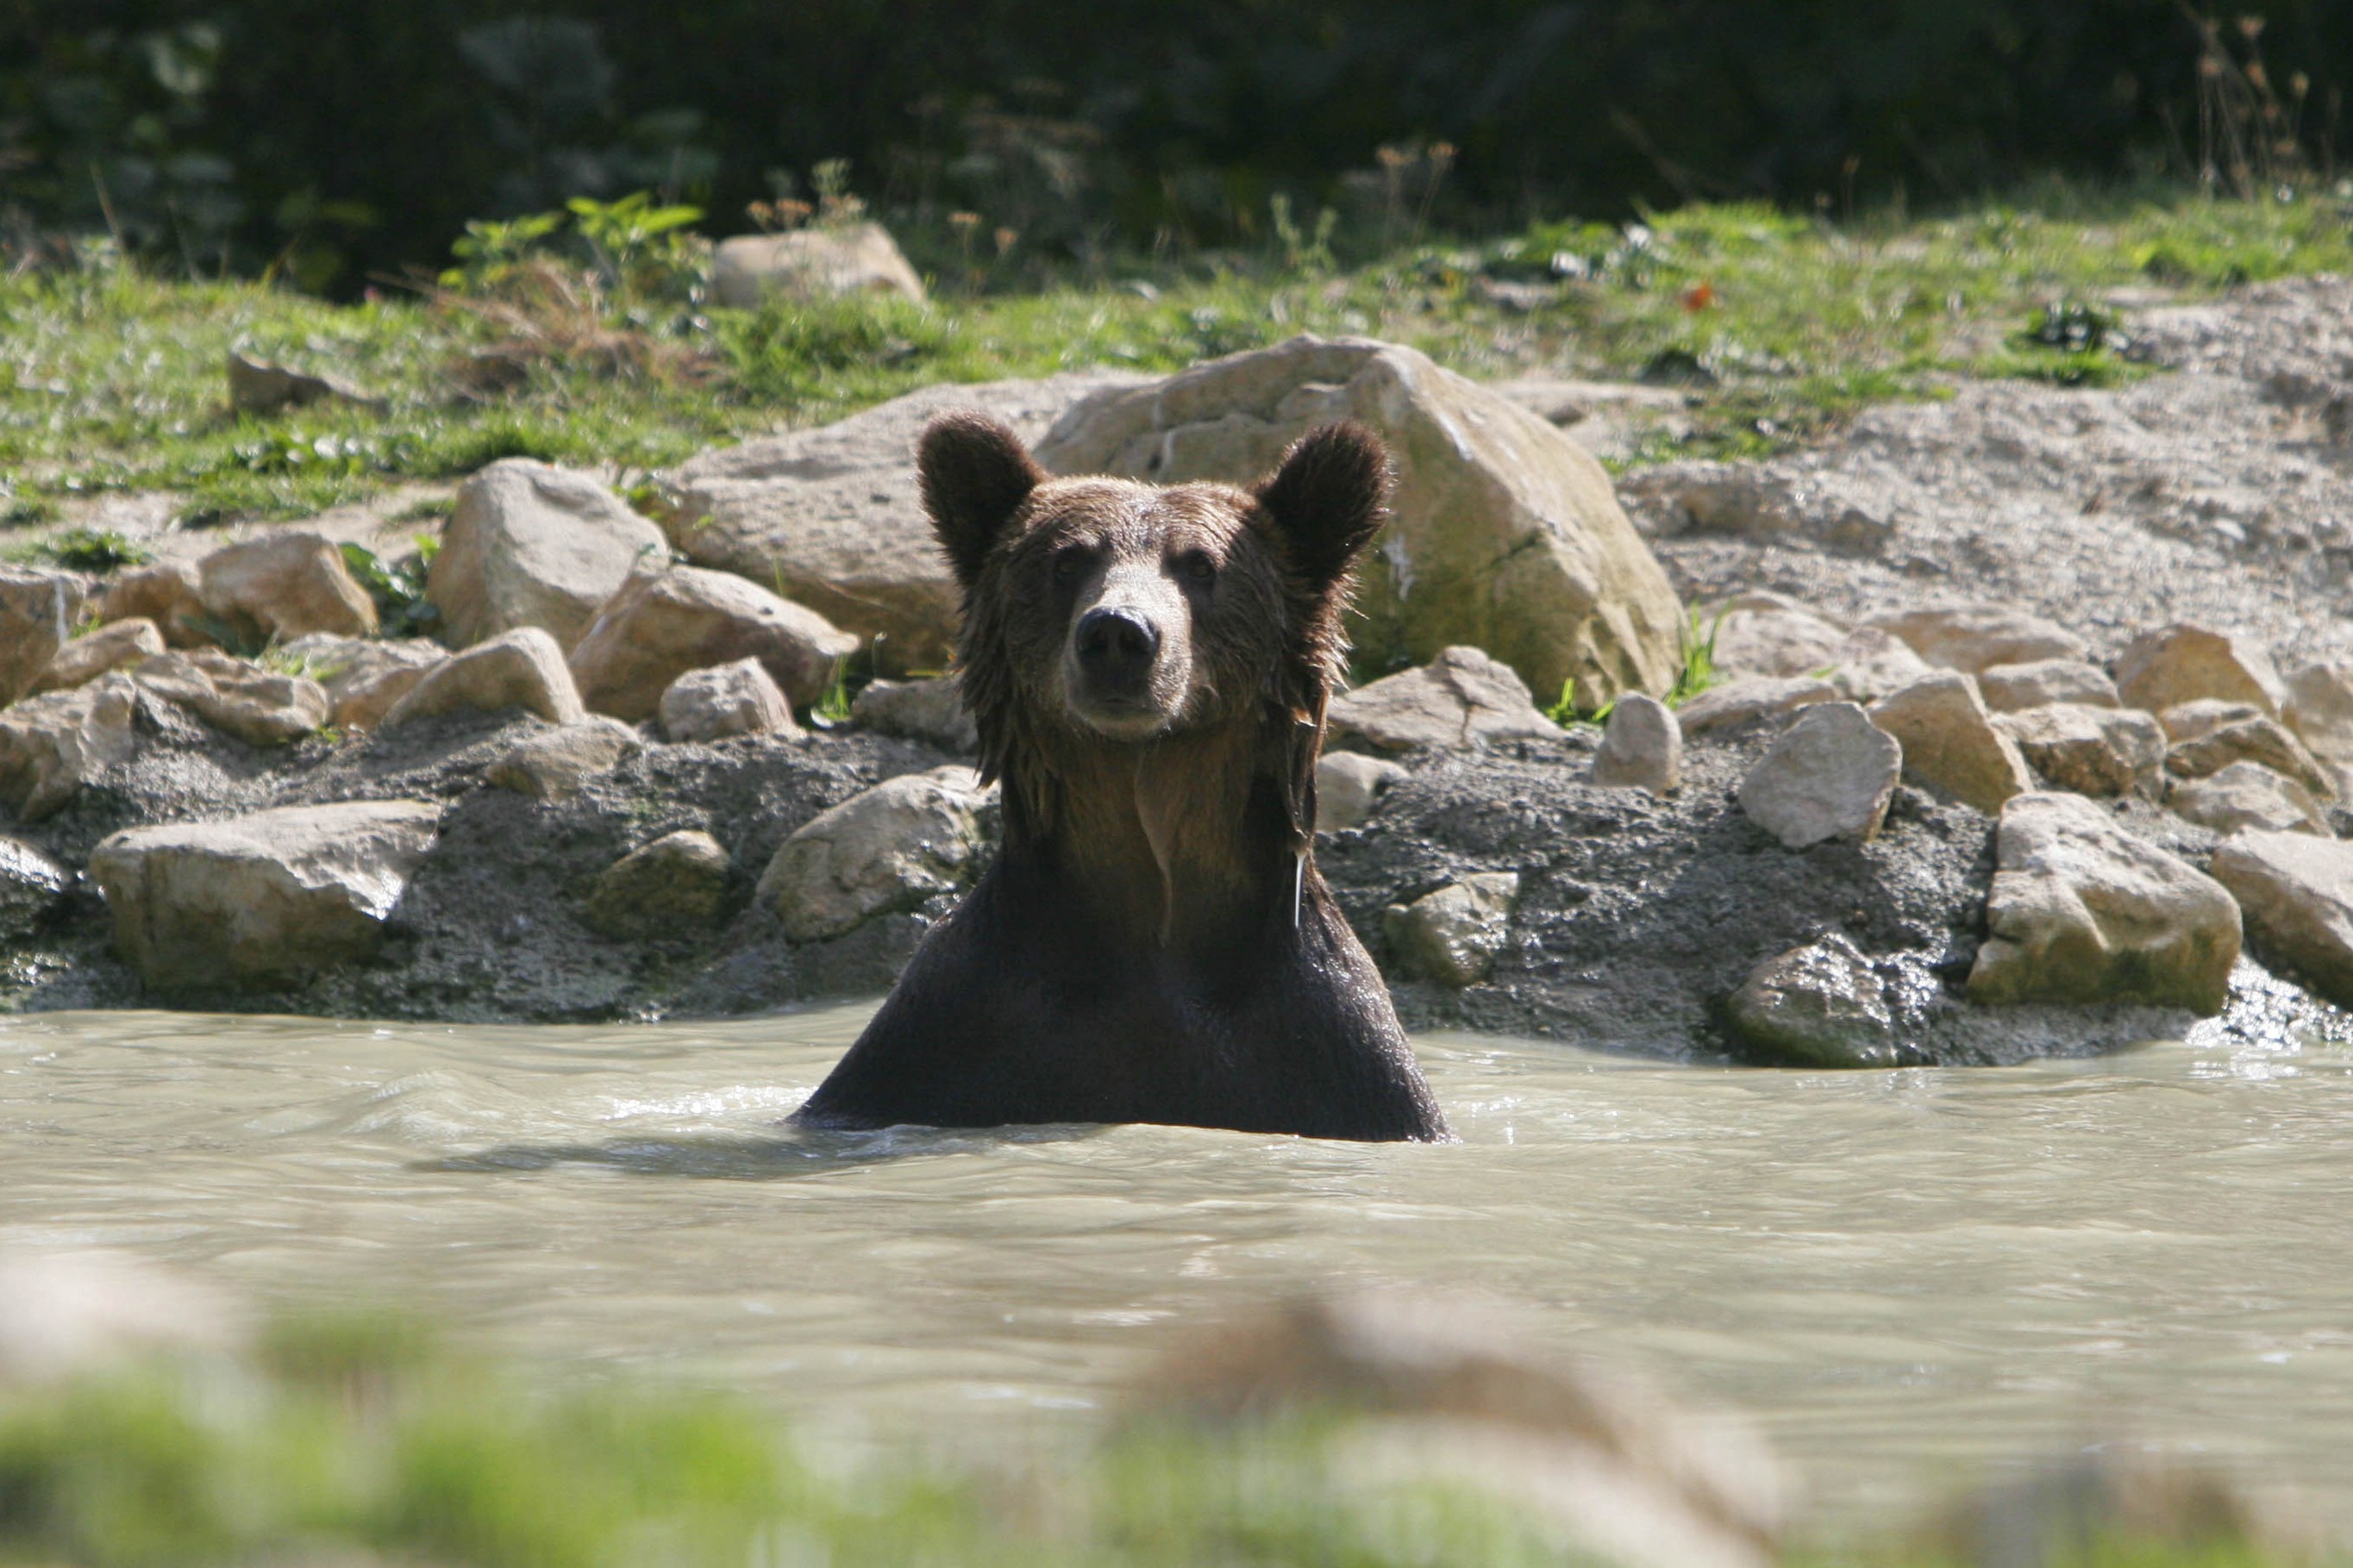 A bear emerging form the pool at the Romanian bear sanctuary